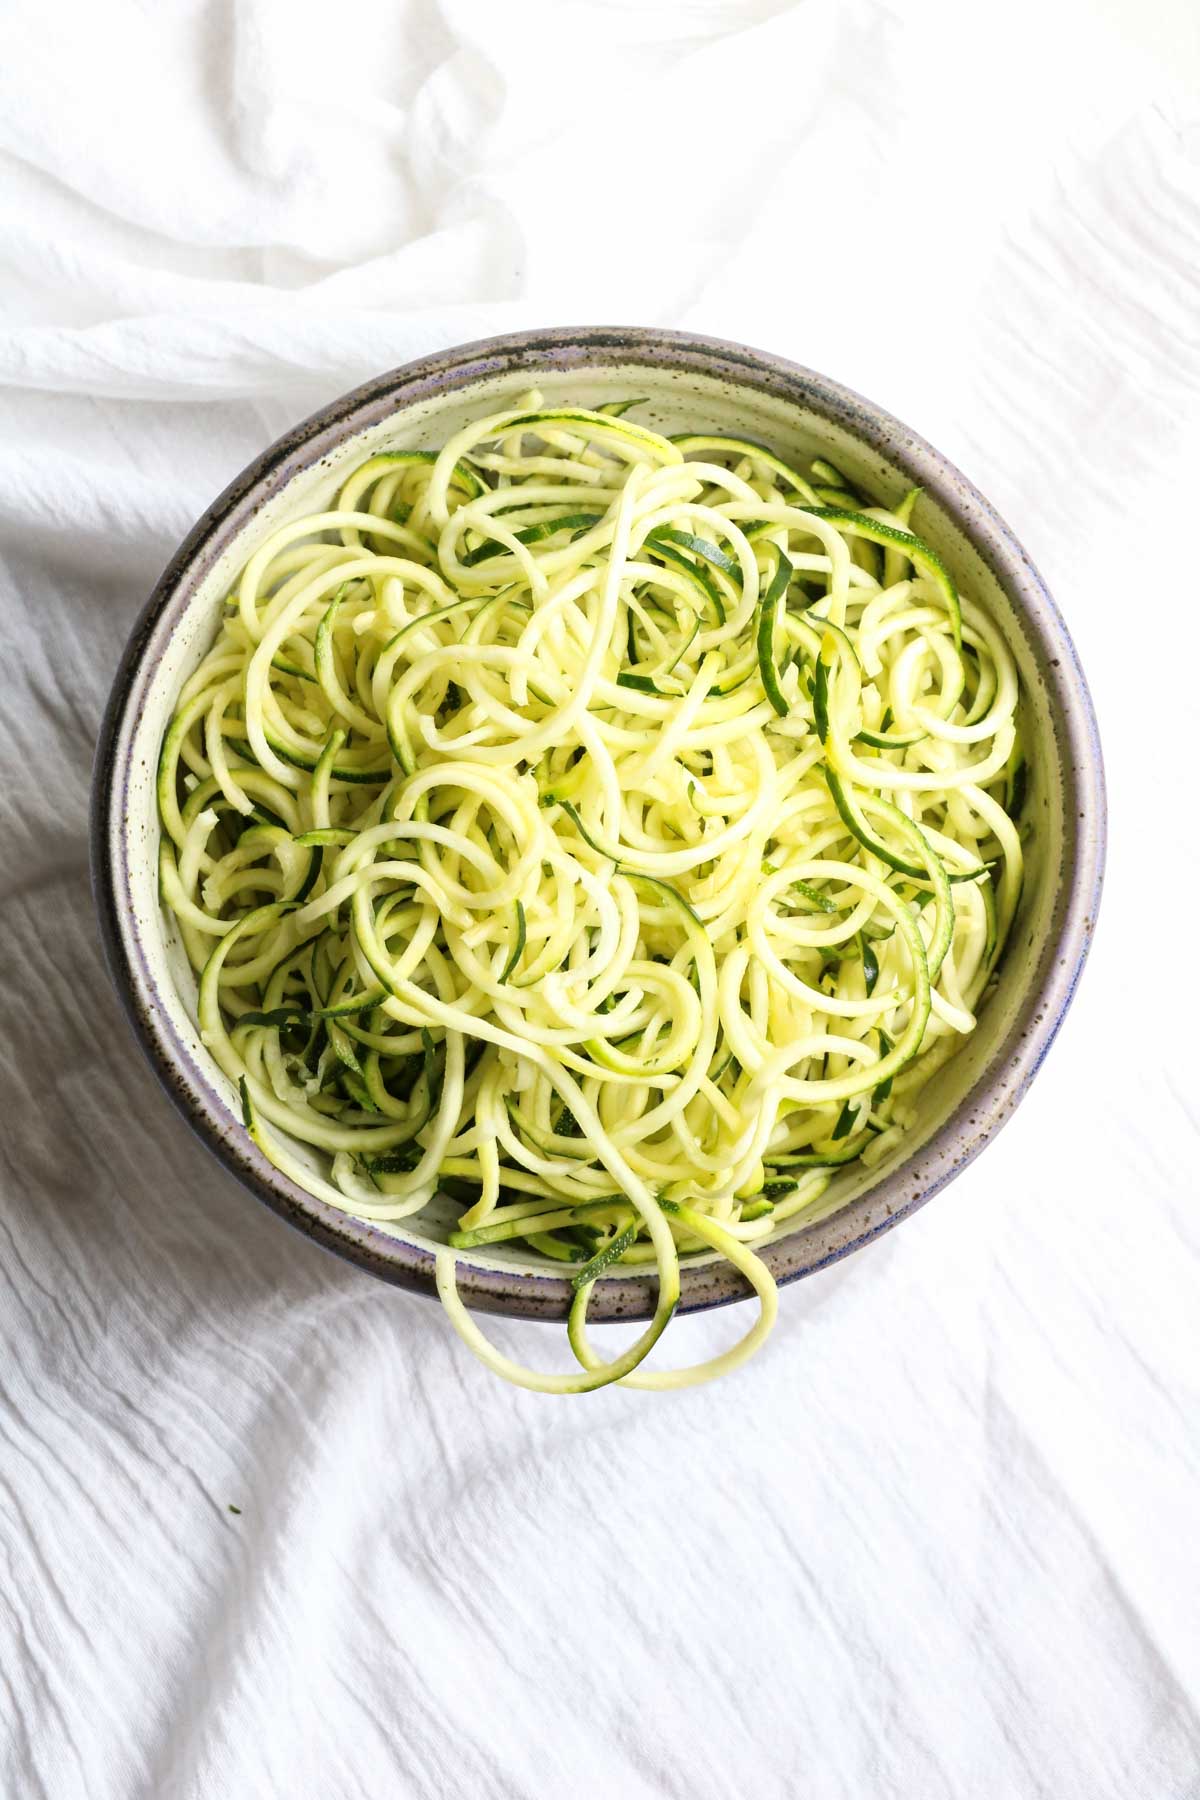 These crazy addictive peanut noodles are so delicious you won't believe they are good for you! Zucchini noodles (zoodles) are the star! Gluten free, vegan, vegetarian. Get full recipe on www.abraskitchen.com